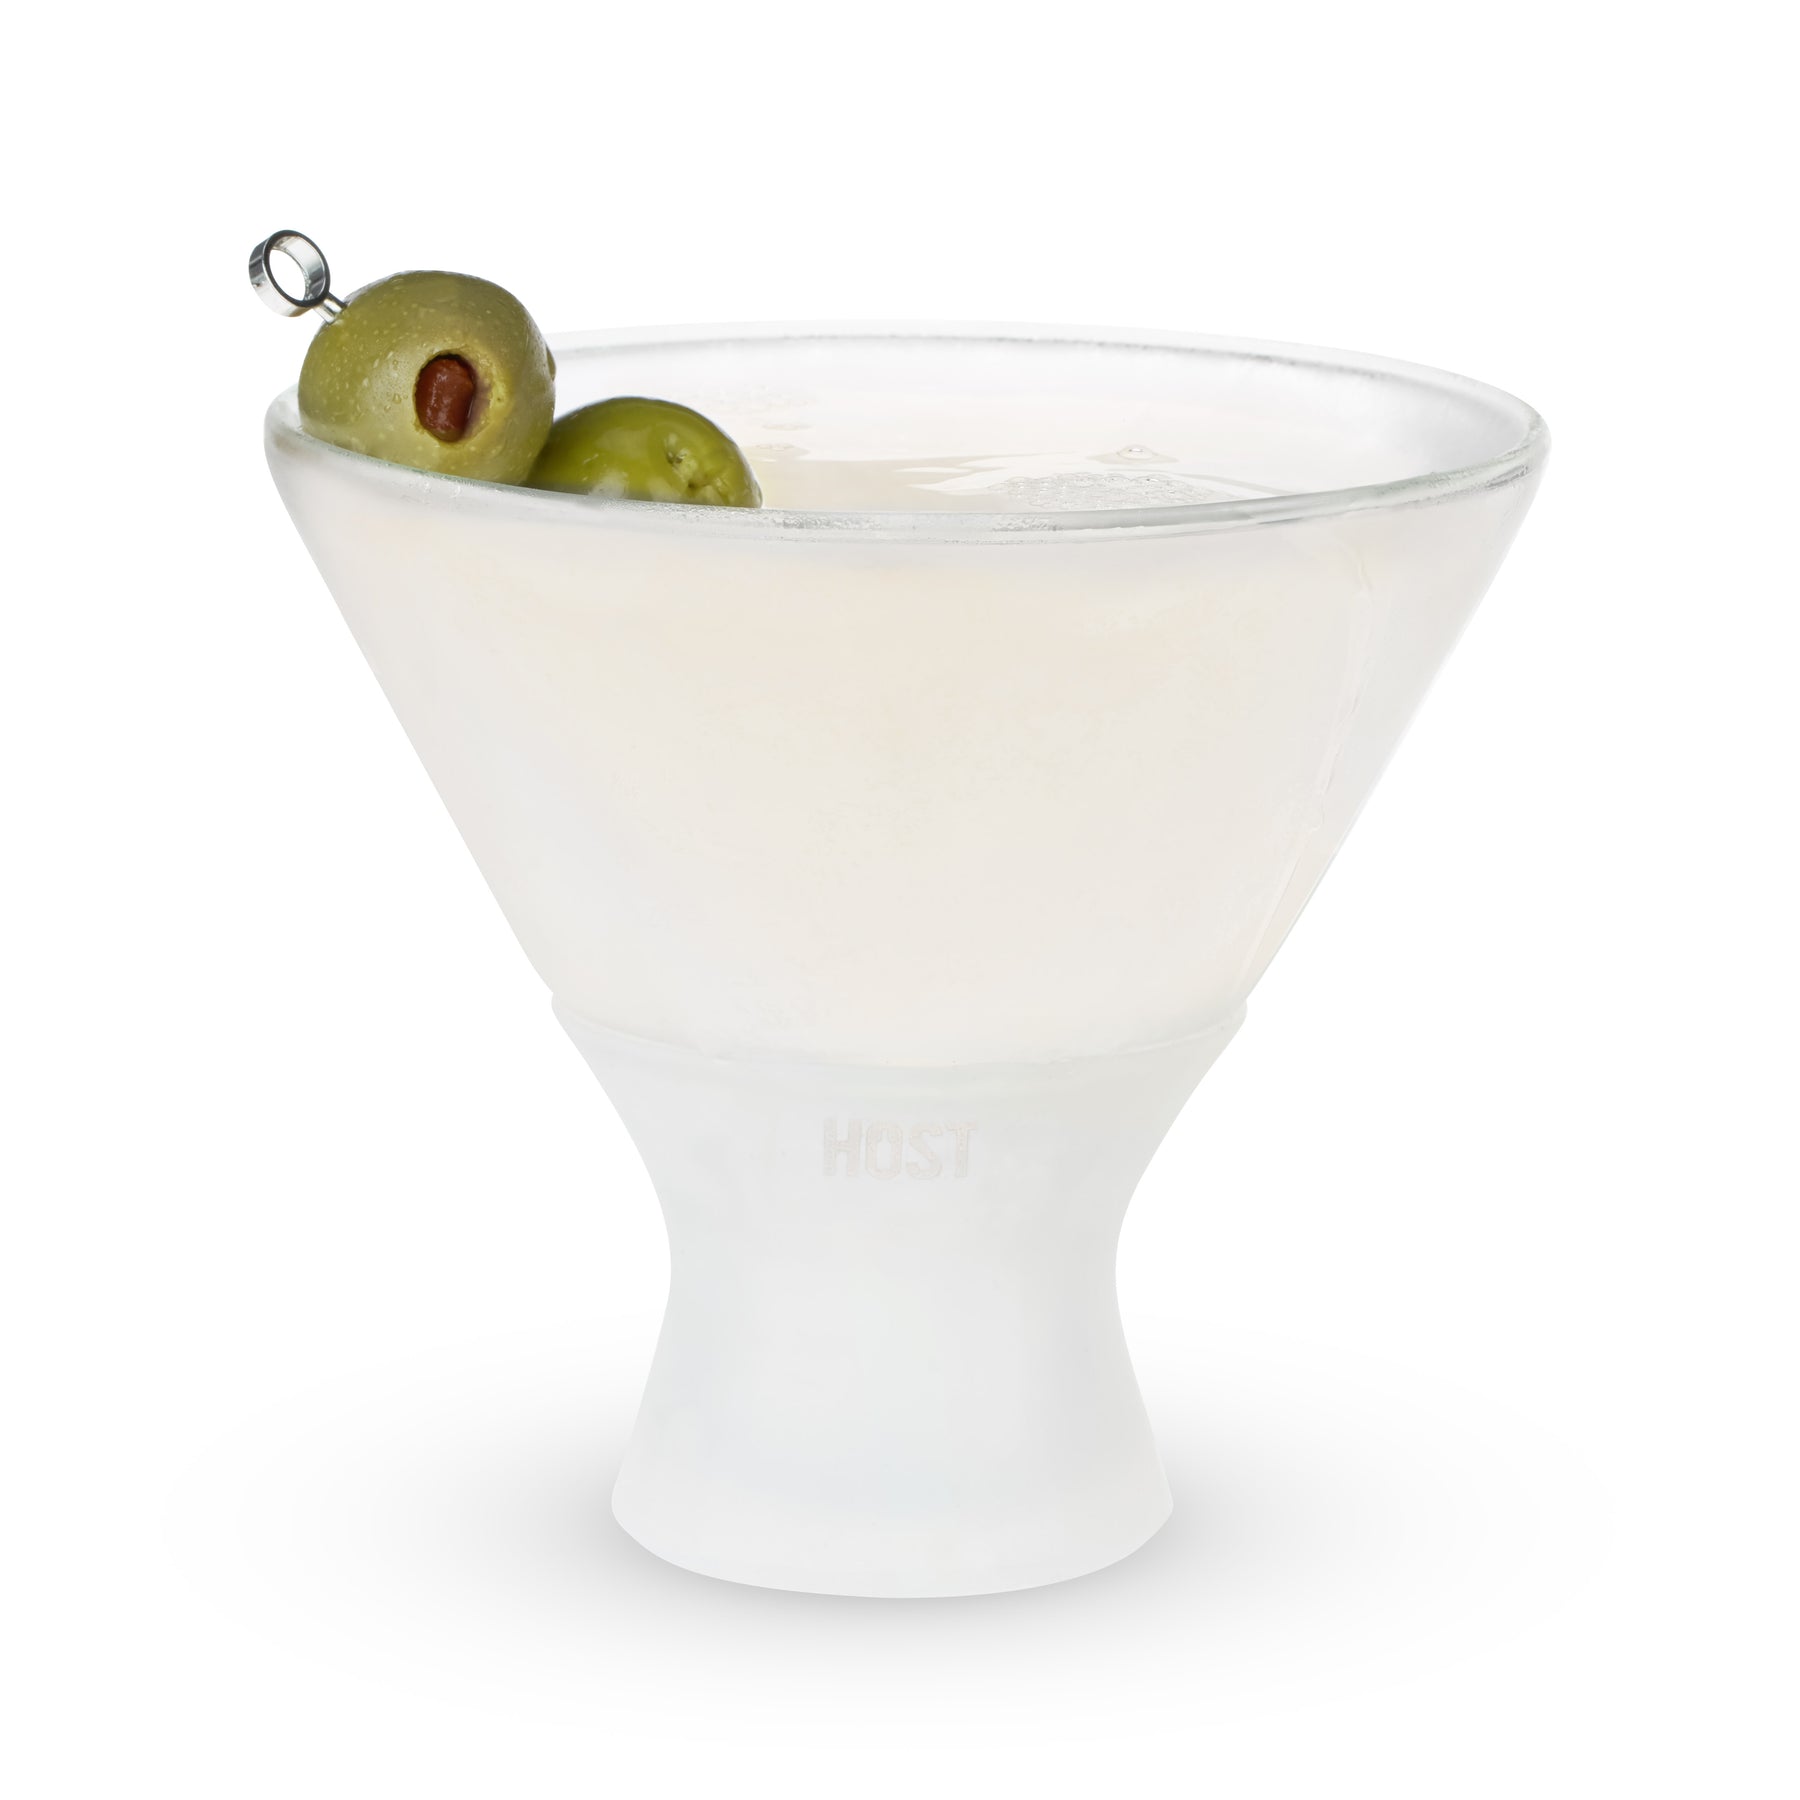 Host Freeze Cooling Cups, Martini, 9 Ounce